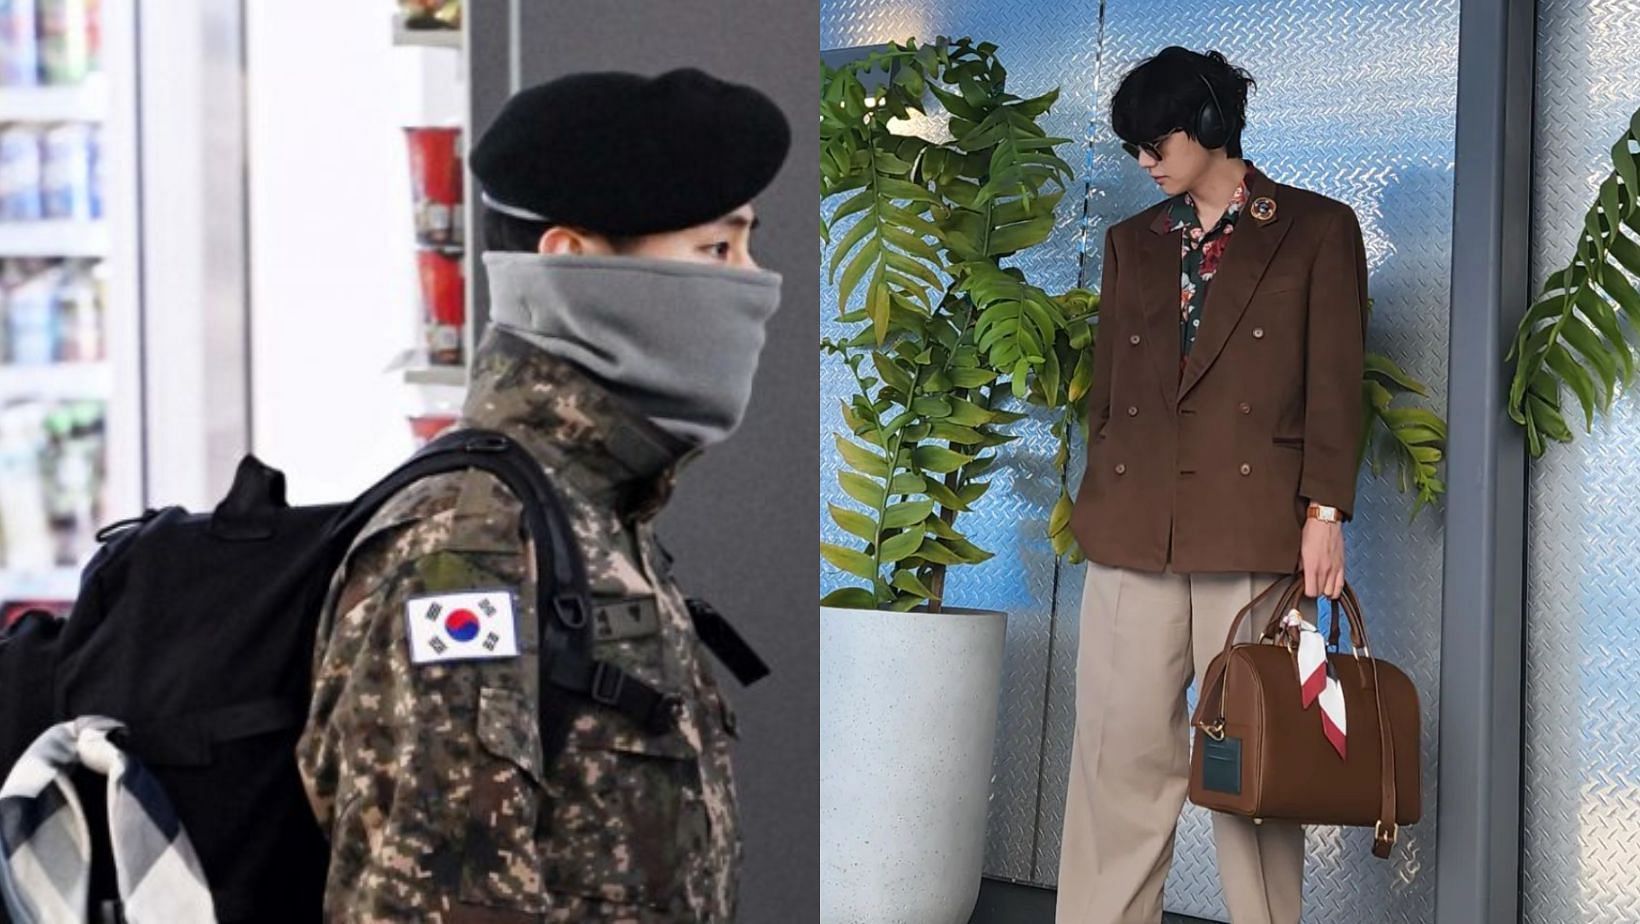 BTS Taehyung&rsquo;s style statement seen during his unit deployment post his training. (Images via X/@pinkpenderV &amp; Instagram/@thv)